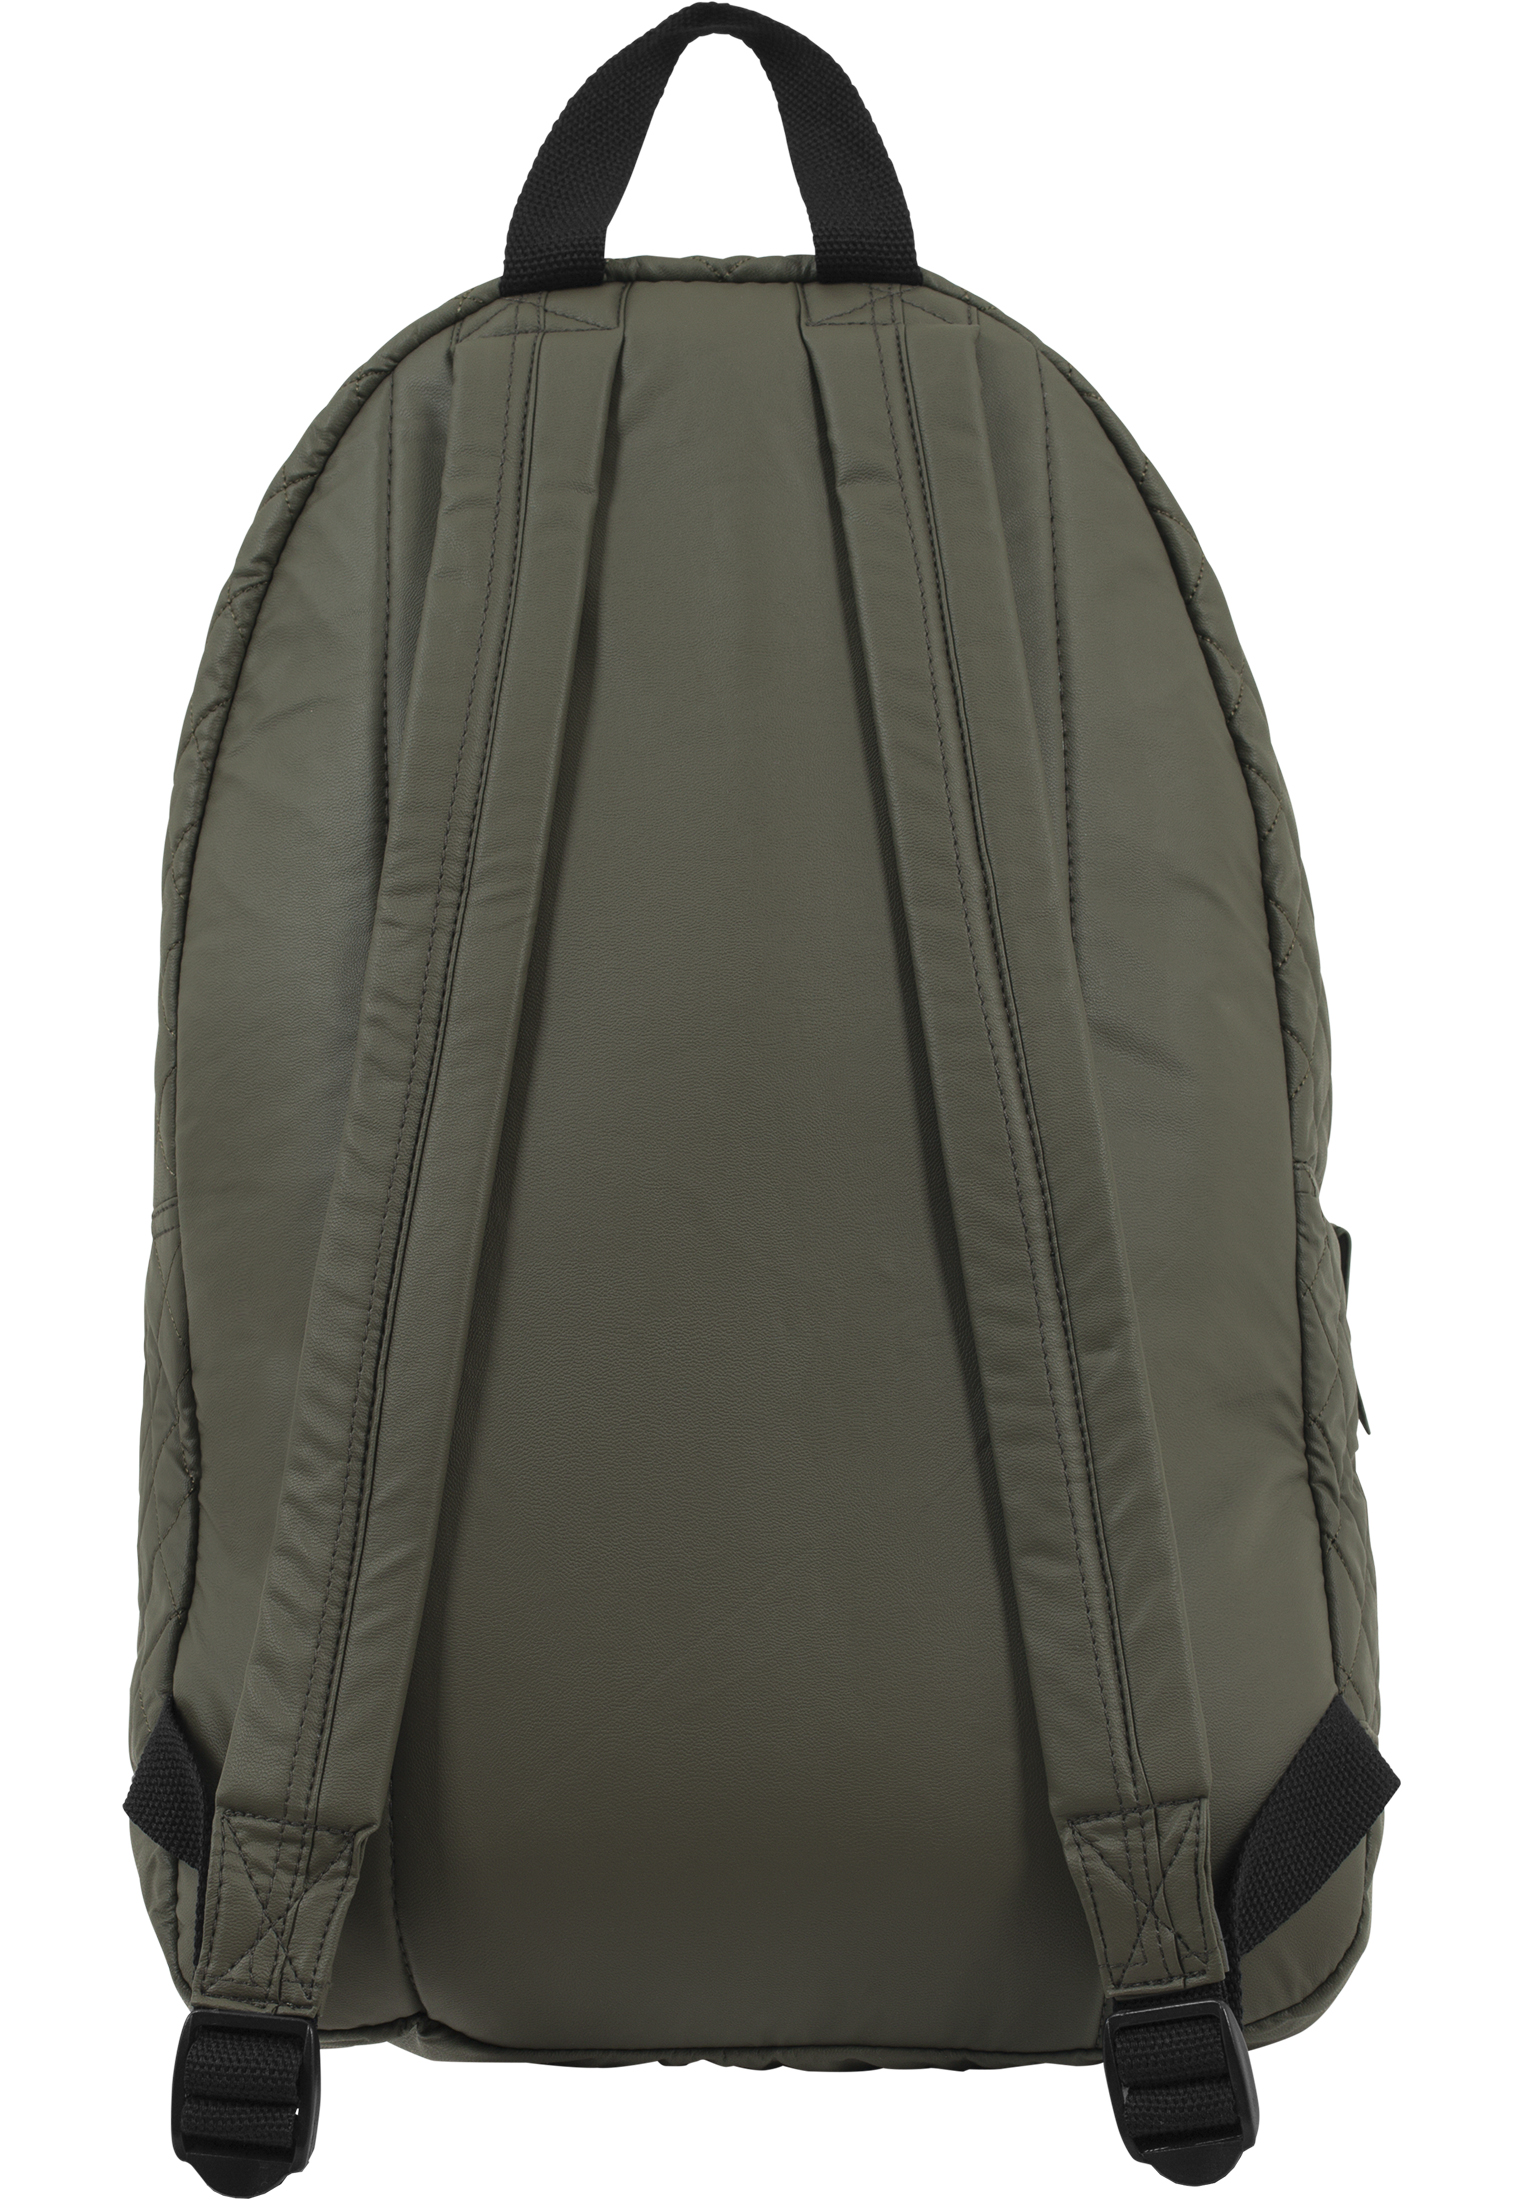 Accessories Diamond Quilt Leather Imitation Backpack in Farbe olive